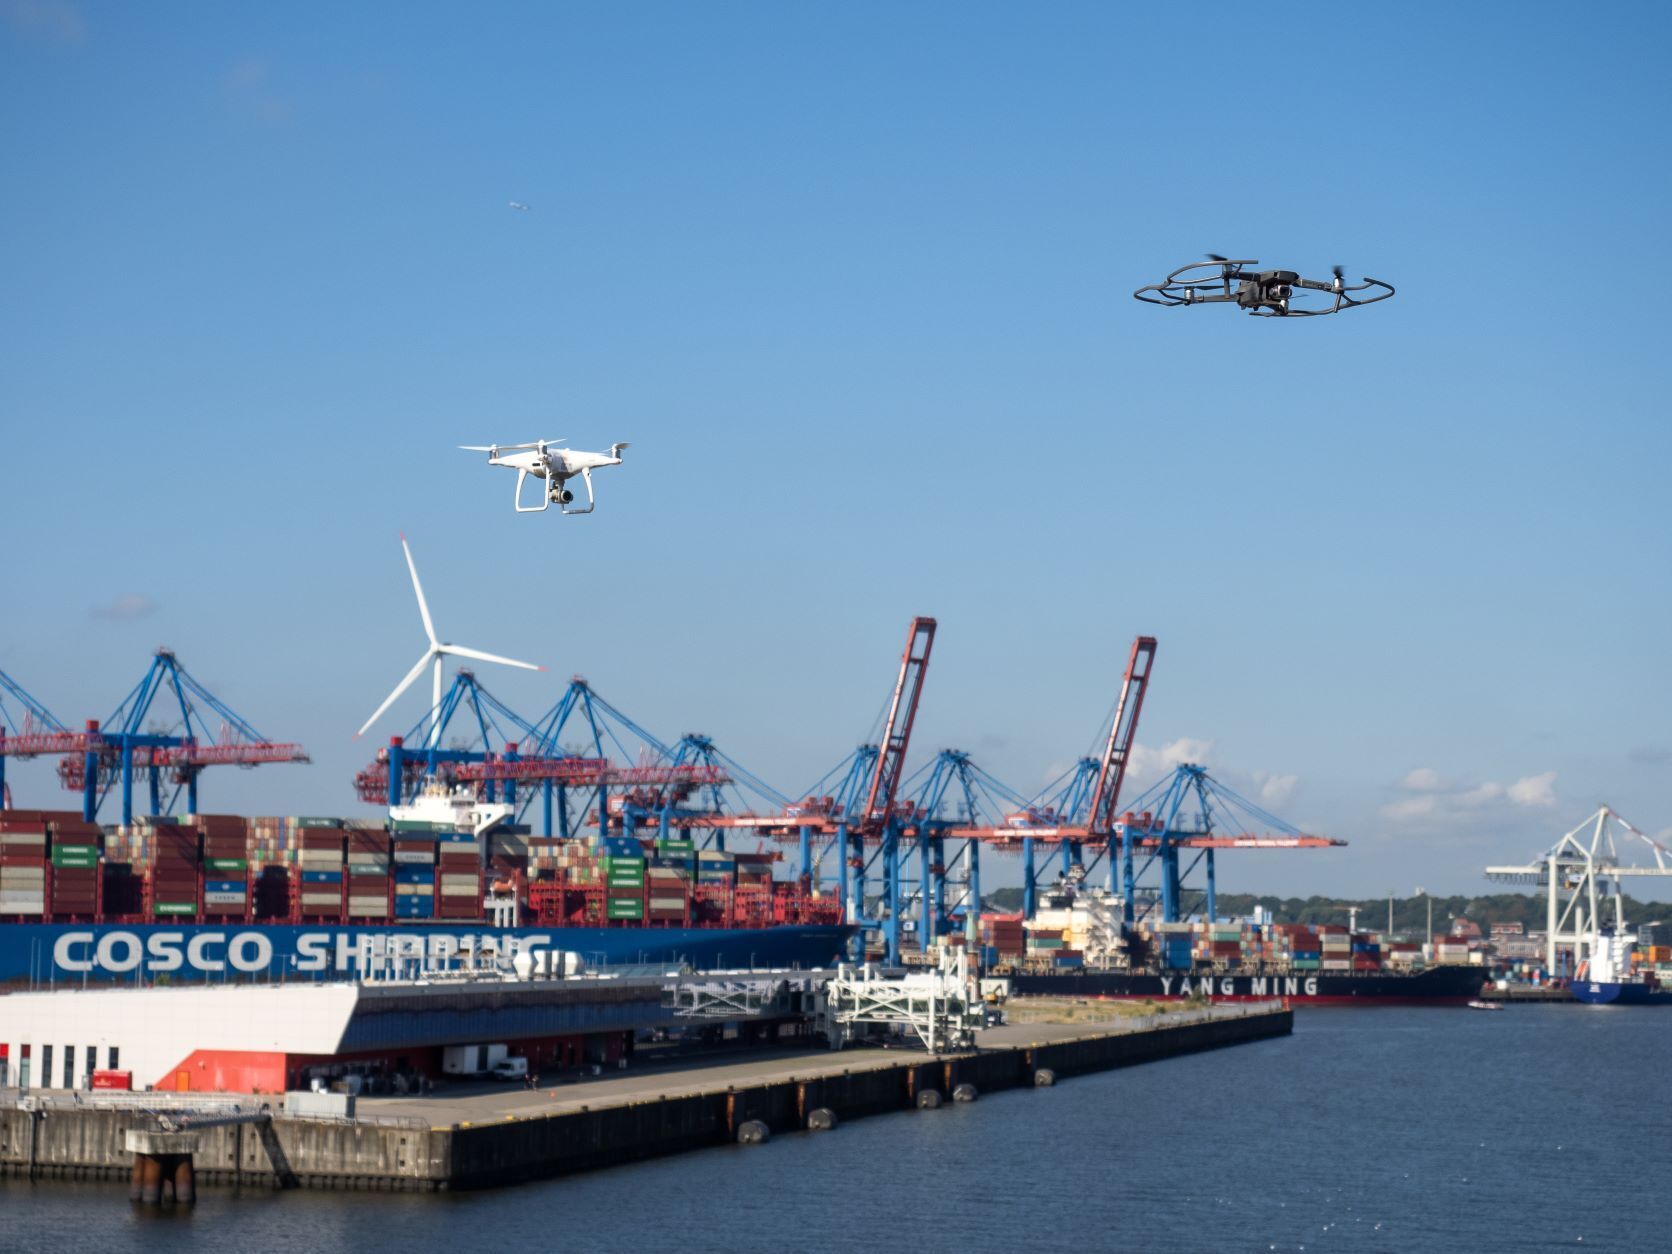 Two drones flying over containers in a cargo port.